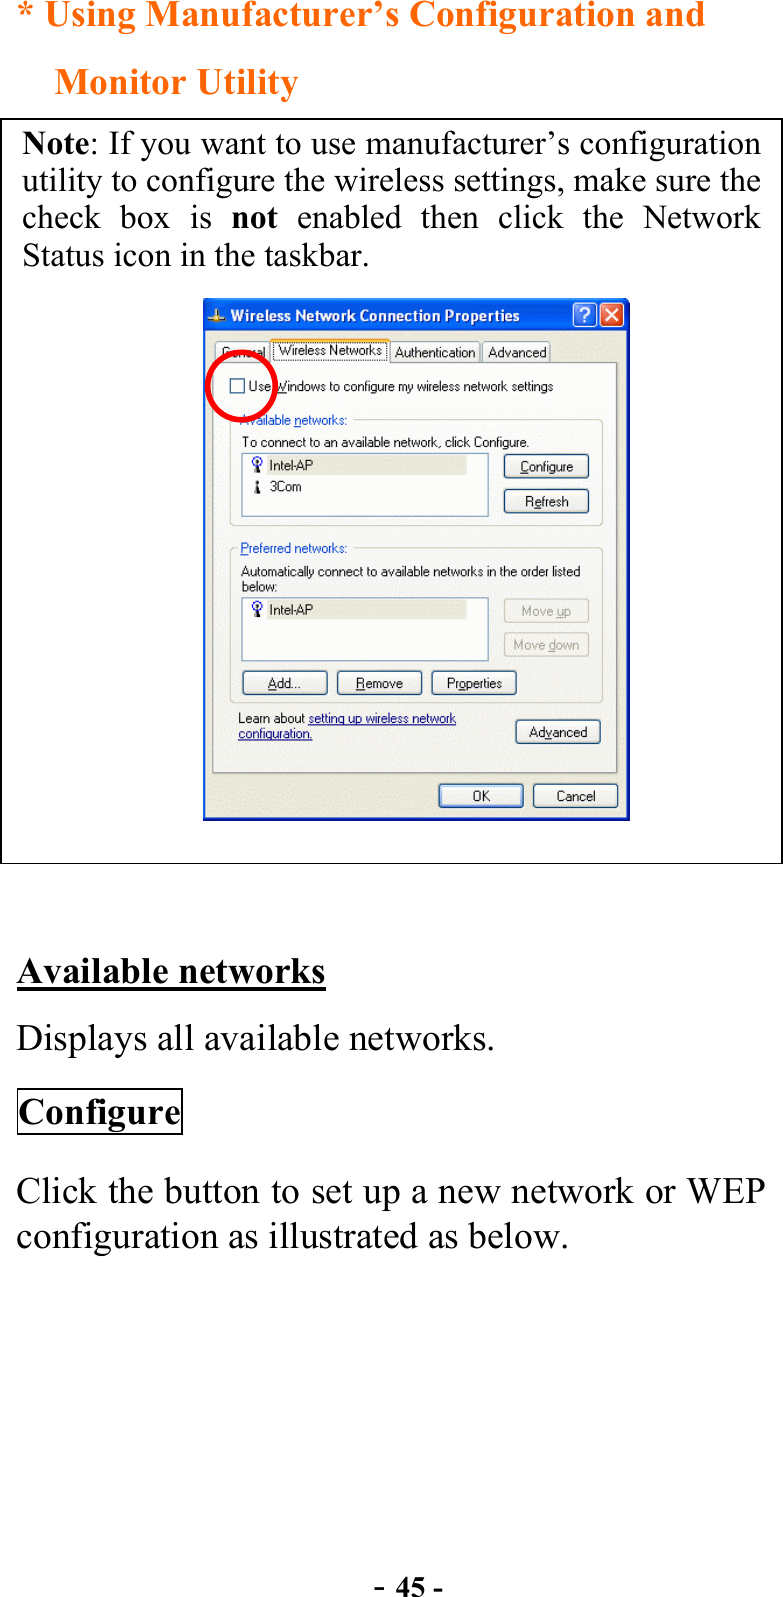  - 45 - * Using Manufacturer’s Configuration and Monitor Utility   Note: If you want to use manufacturer’s configuration utility to configure the wireless settings, make sure the check box is not  enabled then click the Network Status icon in the taskbar.               Available networks Displays all available networks. Configure Click the button to set up a new network or WEP configuration as illustrated as below. 